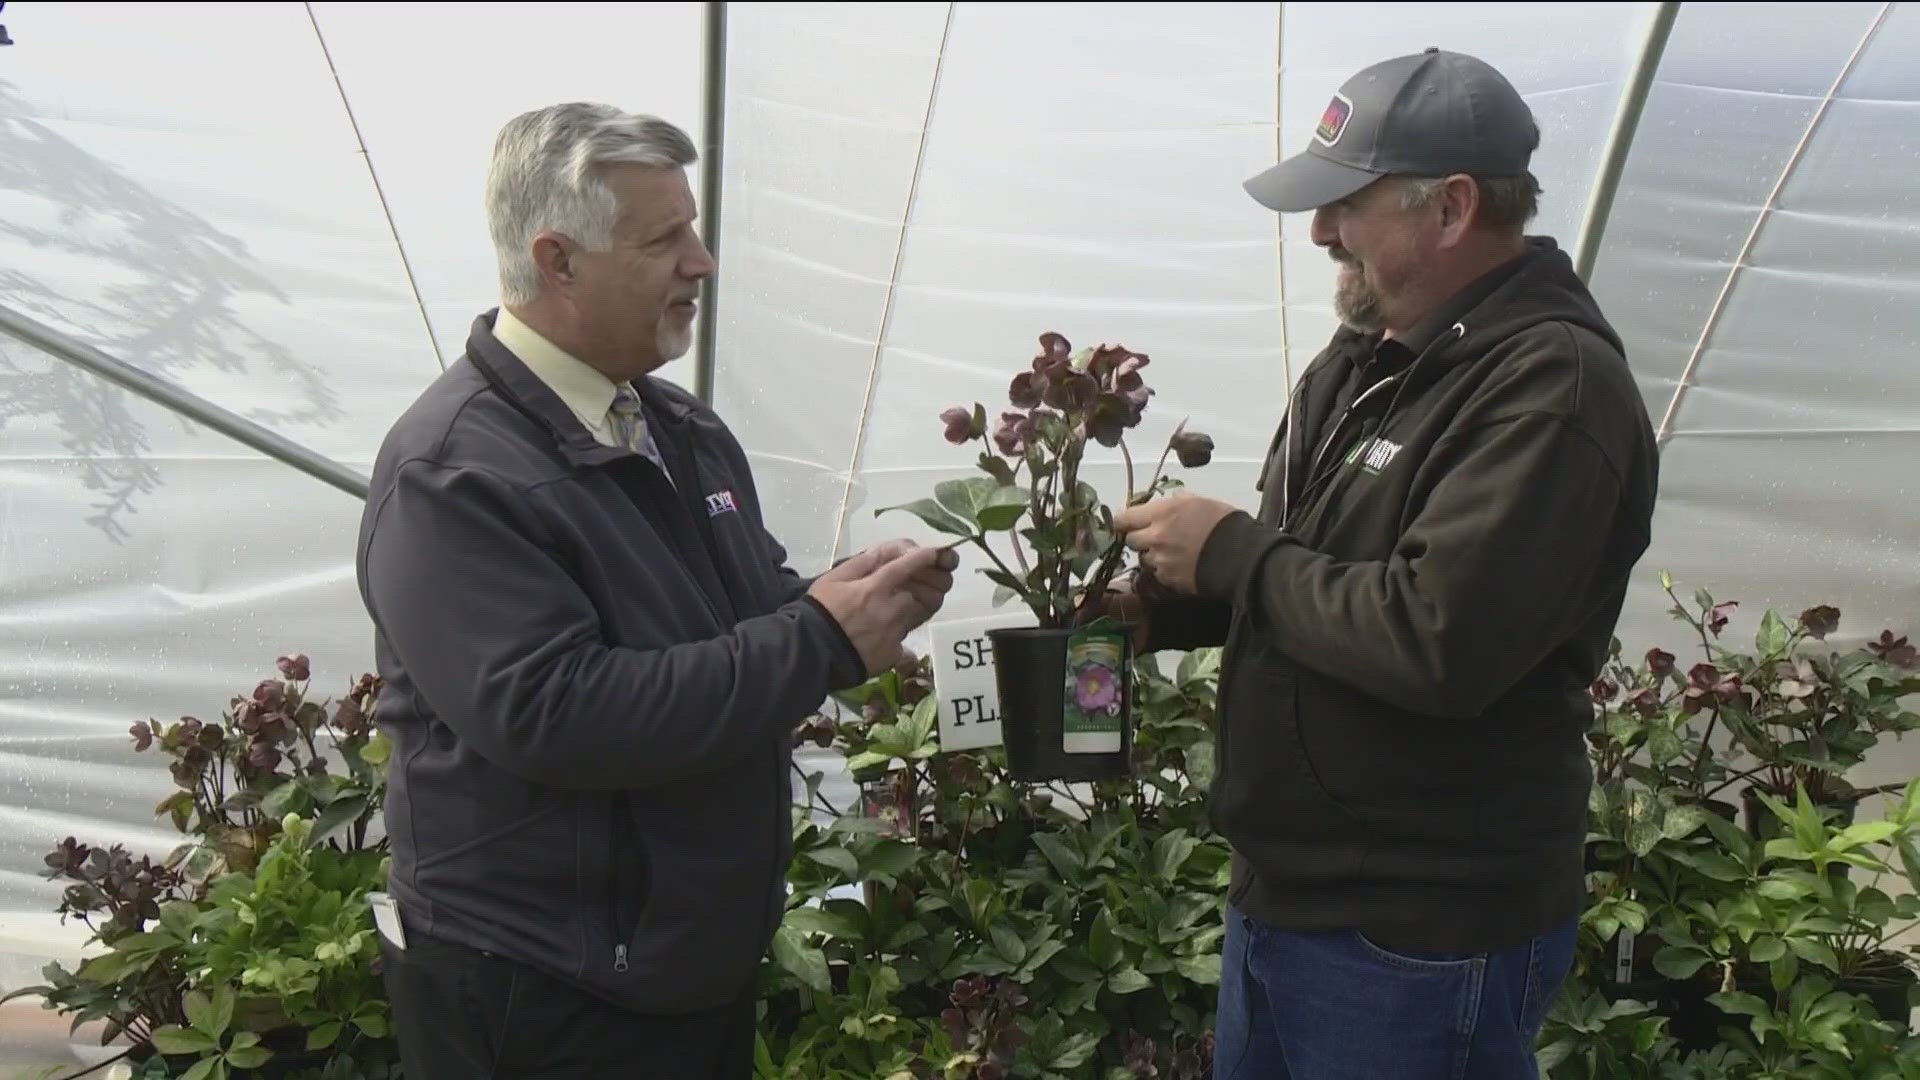 'You Can Grow It' garden master, Jim Duthie, visits Jordan's Garden Center for ideas on some great perennials and Idaho native plants for your dream landscape.